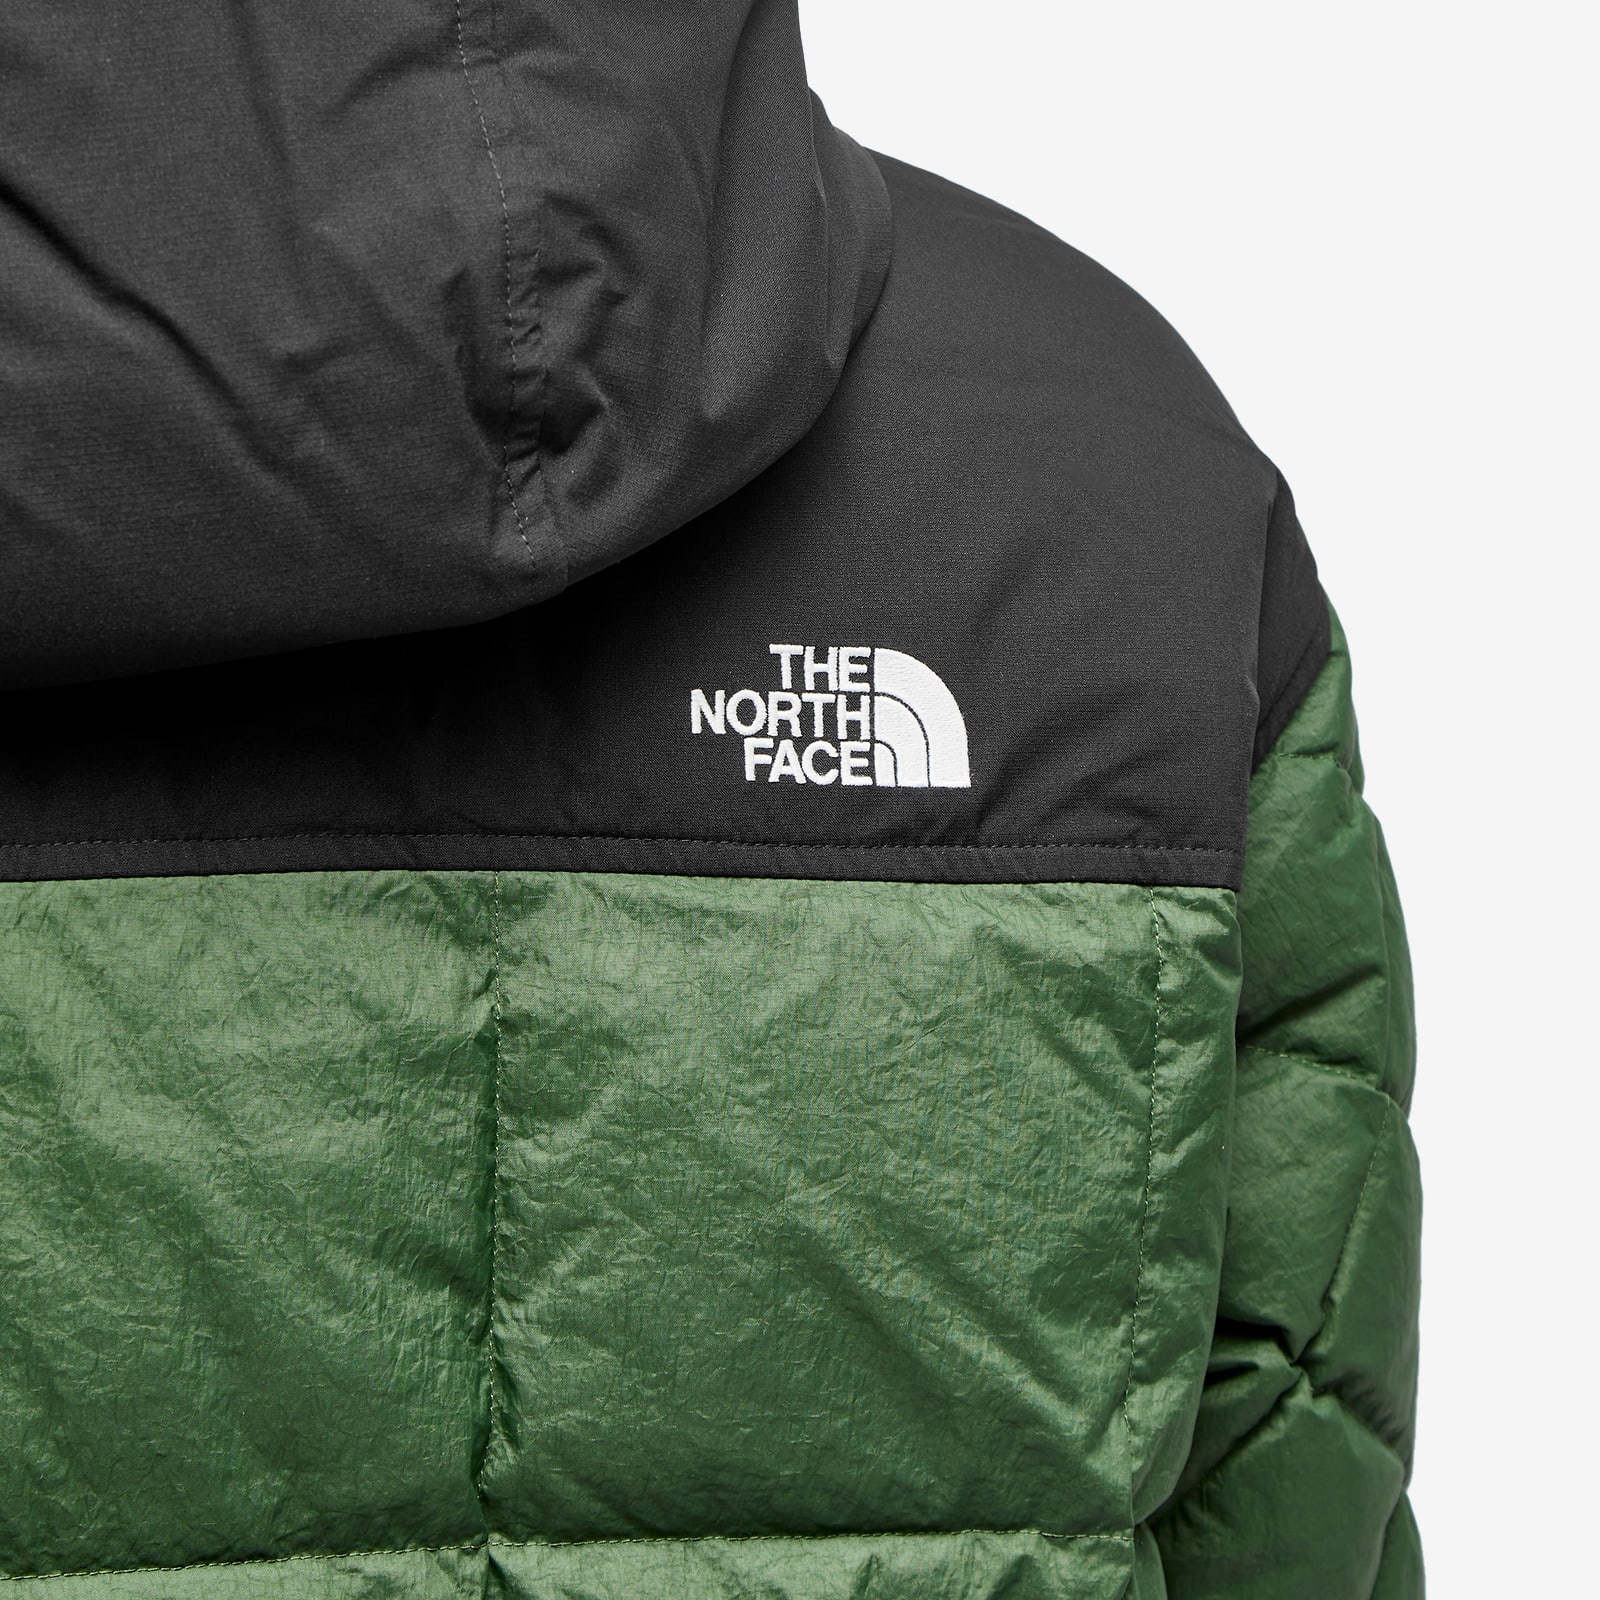 The North Face Black Series Vintage Down Jacket - 5